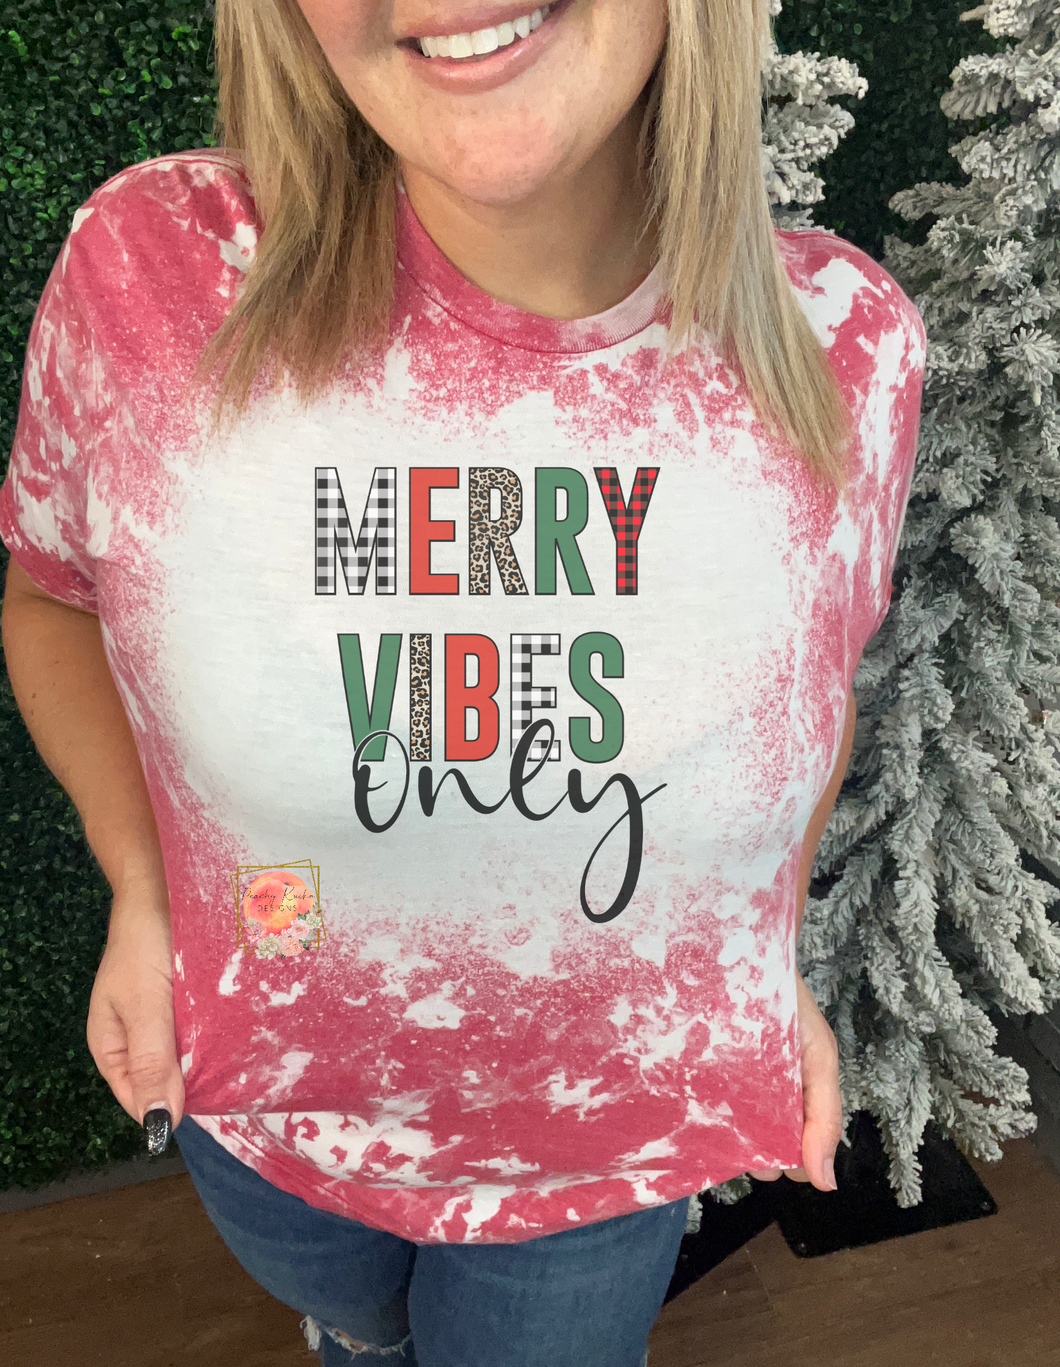 Merry vibes only